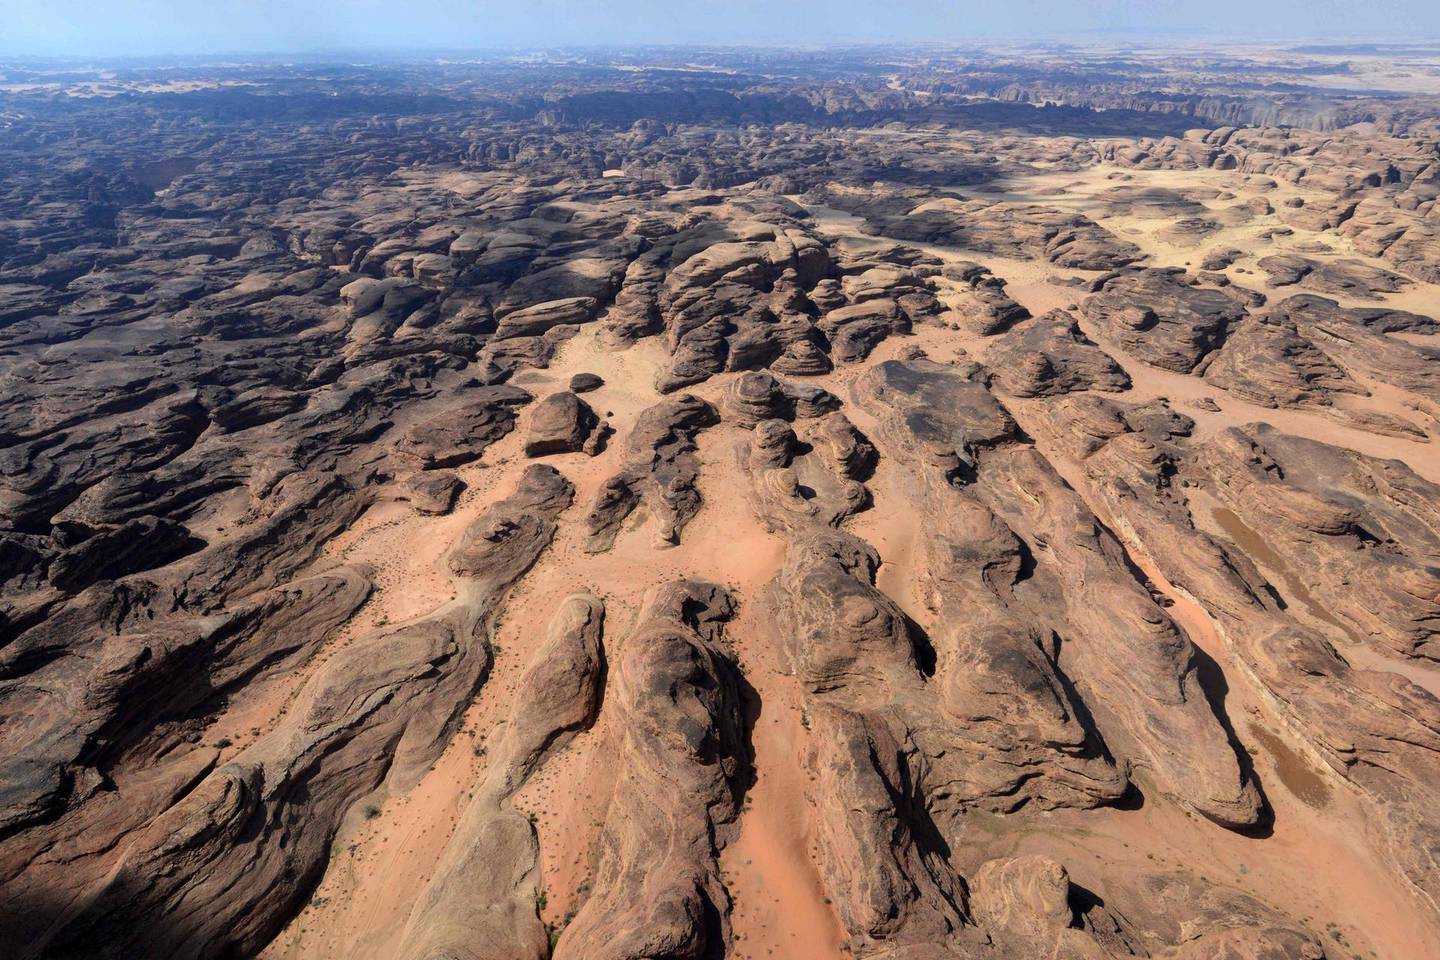 (FILES) This file photo taken on February 11, 2019 shows an aerial view of the coloured rocks in the Ula desert near the northwestern Saudi town of al-Ula. Citizens from 49 countries are now eligible for tourist visas online or on arrival to Saudi Arabia, thanks to a landmark decision enacted last month, relaxing rules that had largely restricted visits to business travellers and Muslim pilgrims, with the authorities banking on large cities like the capital Riyadh and the western Red Sea port of Jeddah through large-scale investments, including in entertainment.
 / AFP / FAYEZ NURELDINE
